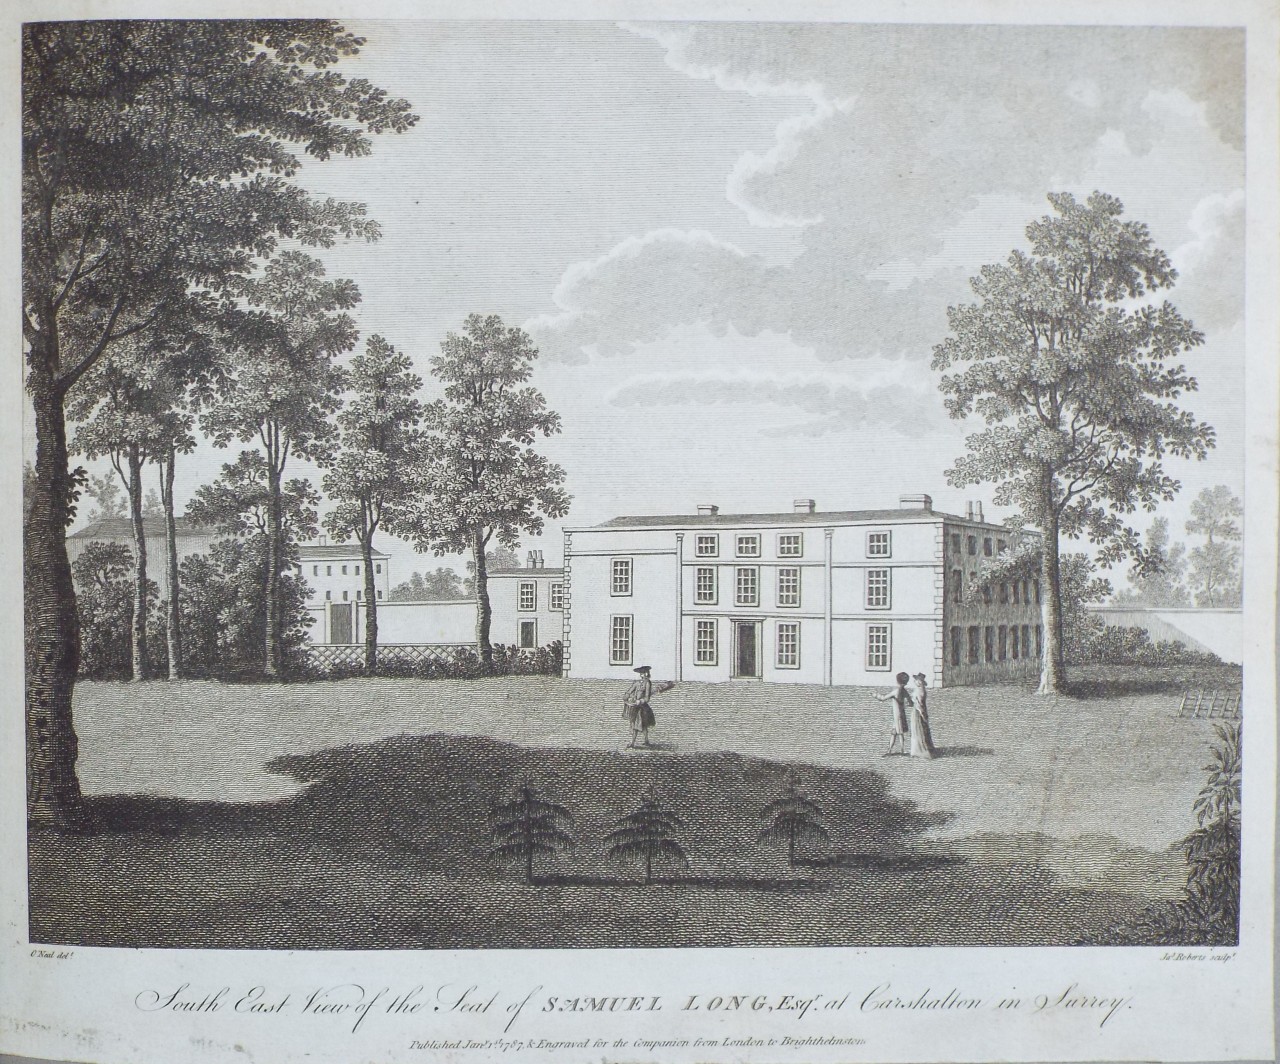 Print - South East View of the Seat of Samuel Long, Esqr., at Carshalton in Surry. - Roberts